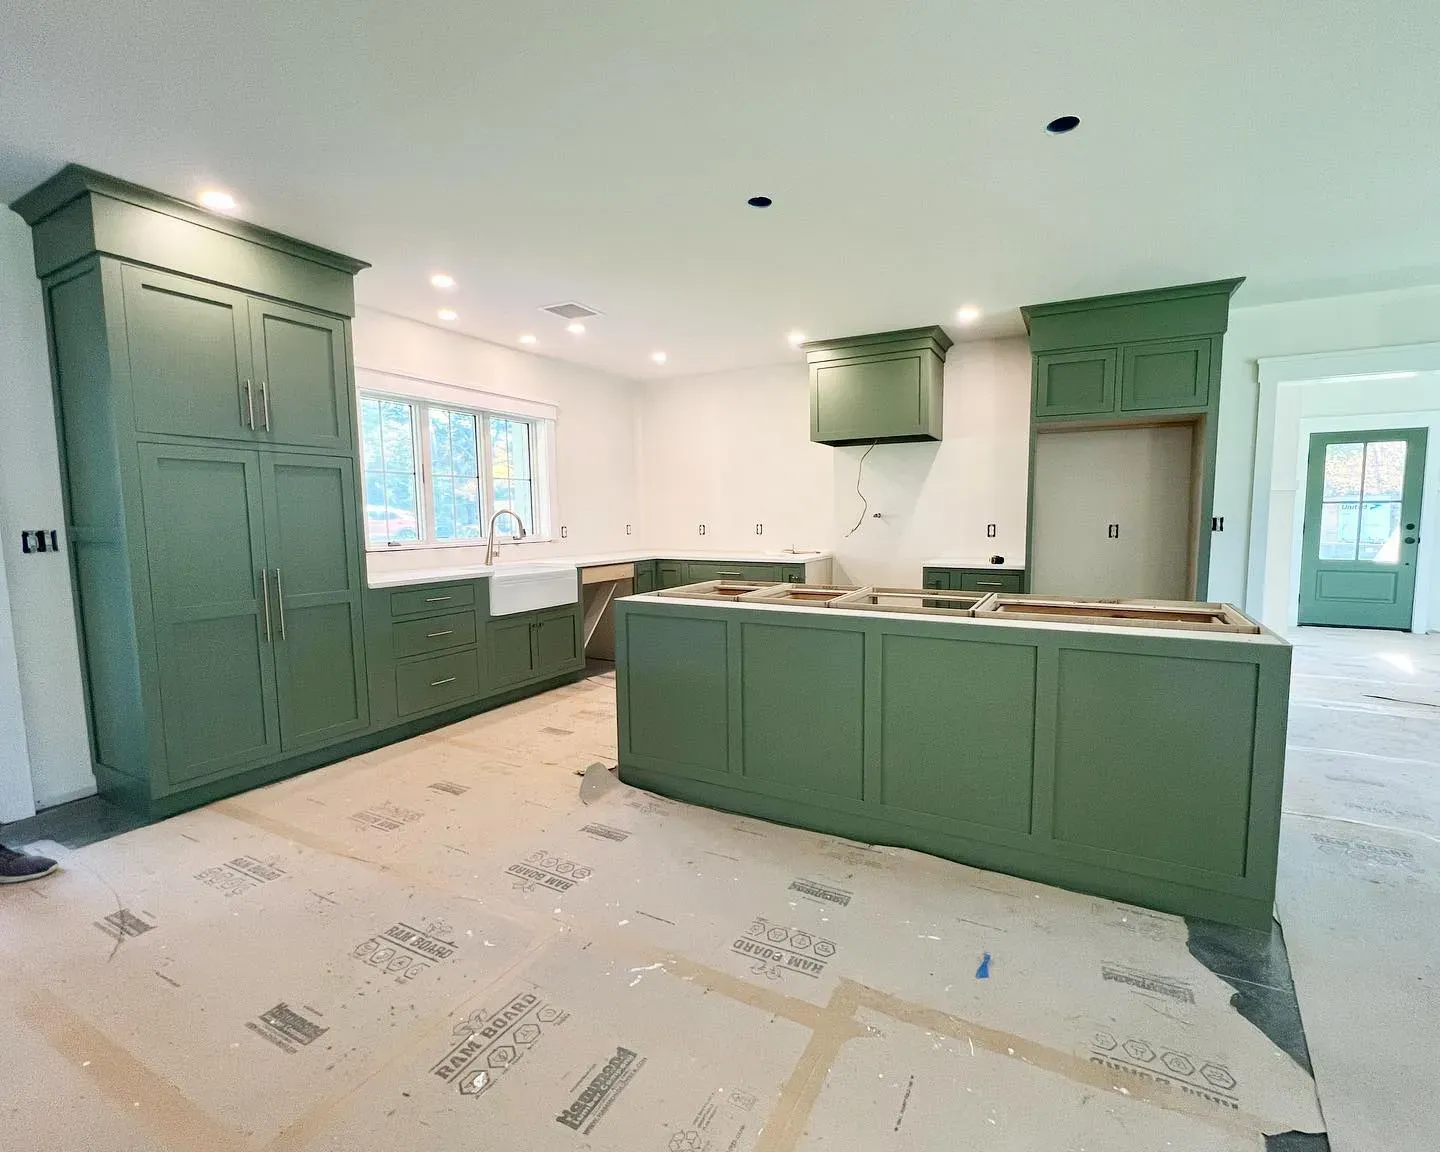 Benjamin Moore High Park kitchen cabinets review